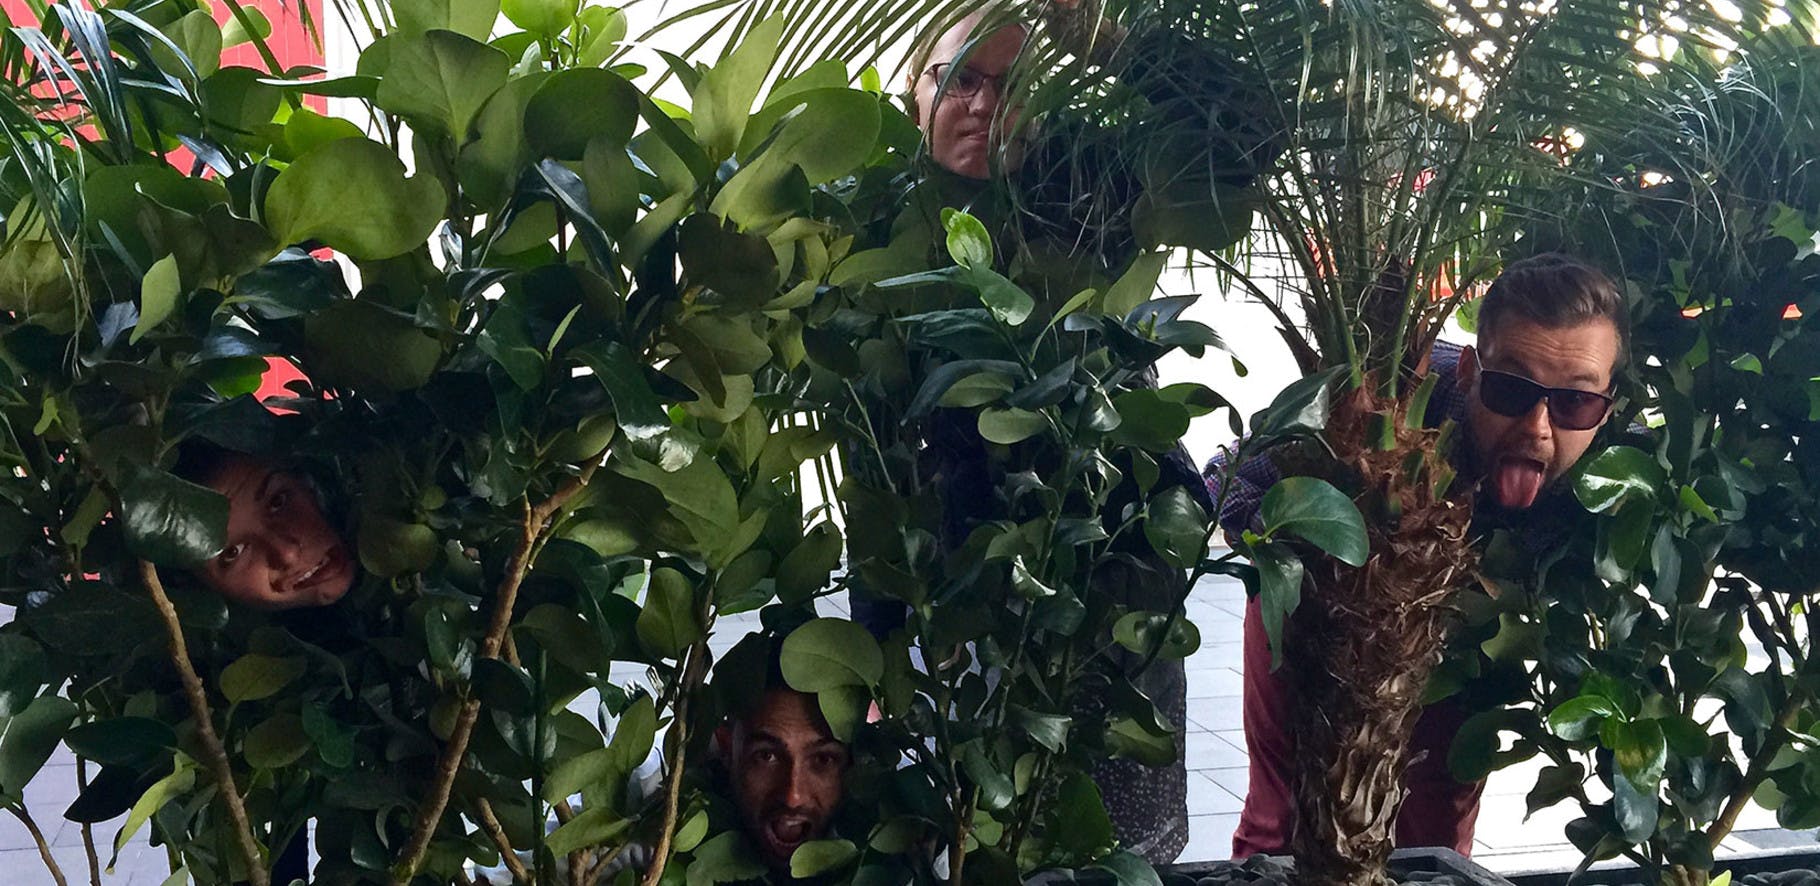 funny image of people peering through some bushes